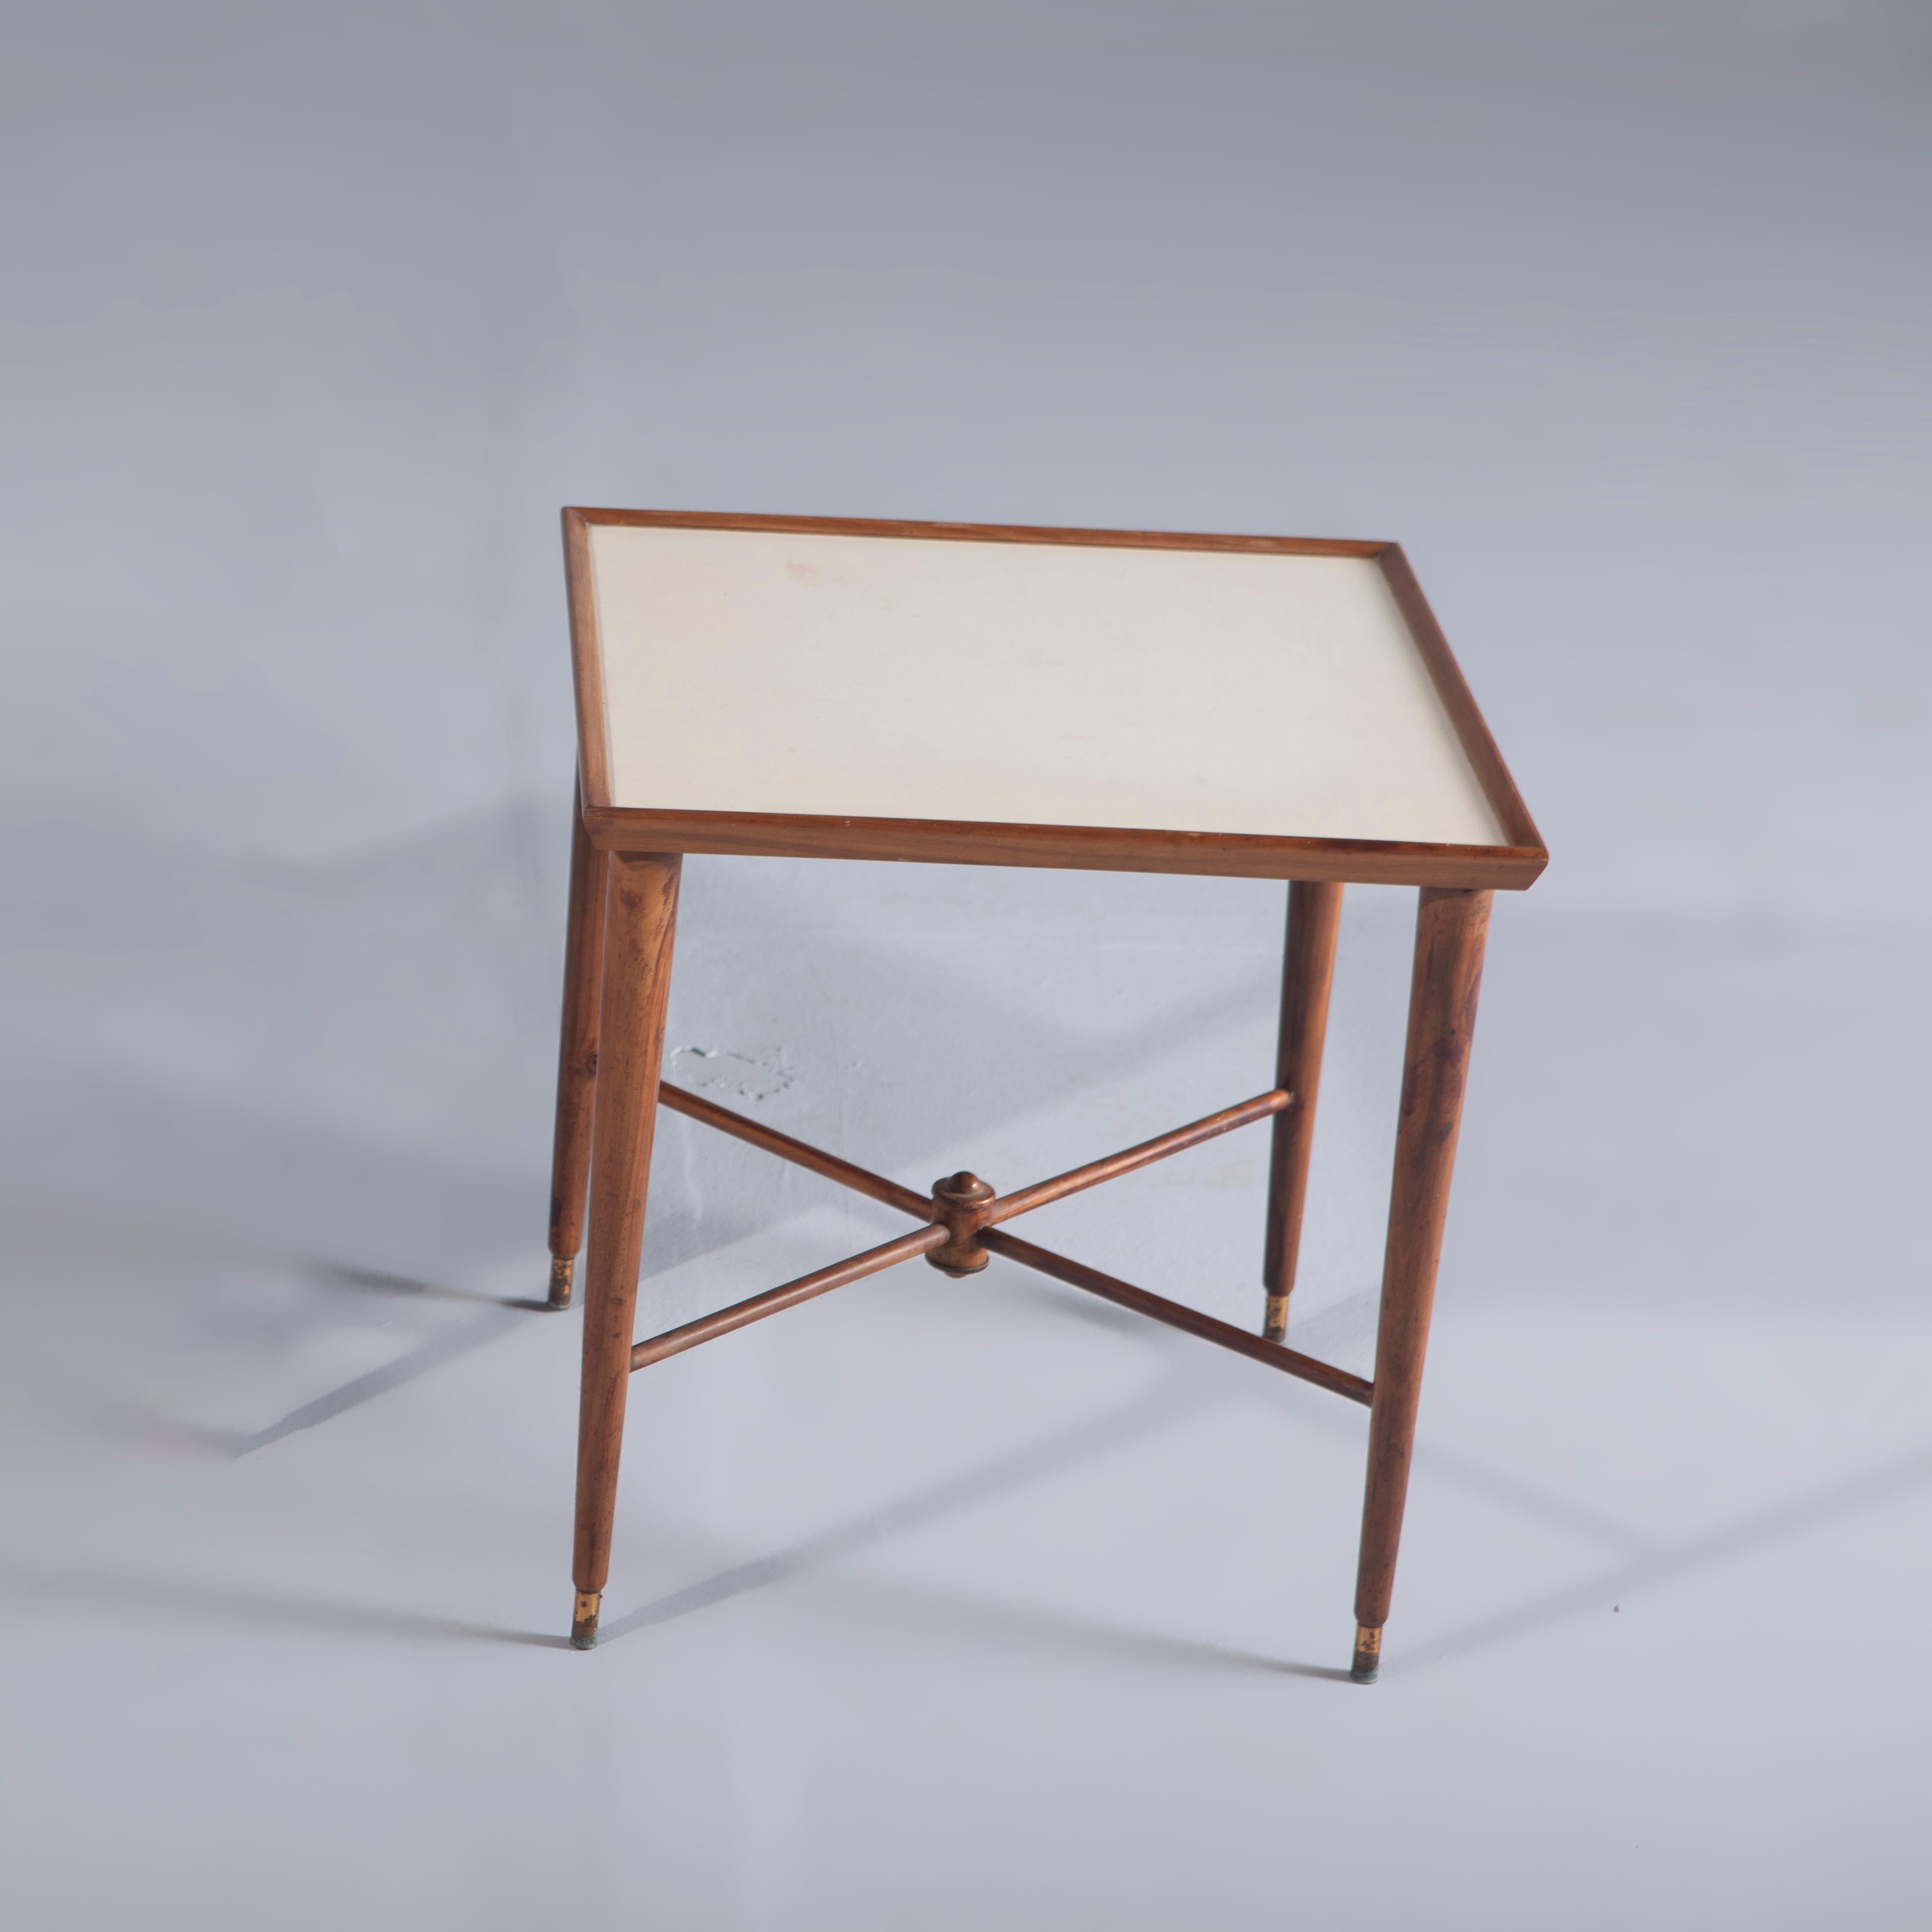 Varnished Mid-Century Modern Side Table by Móveis Cavallaro, Brazil, 1960s For Sale